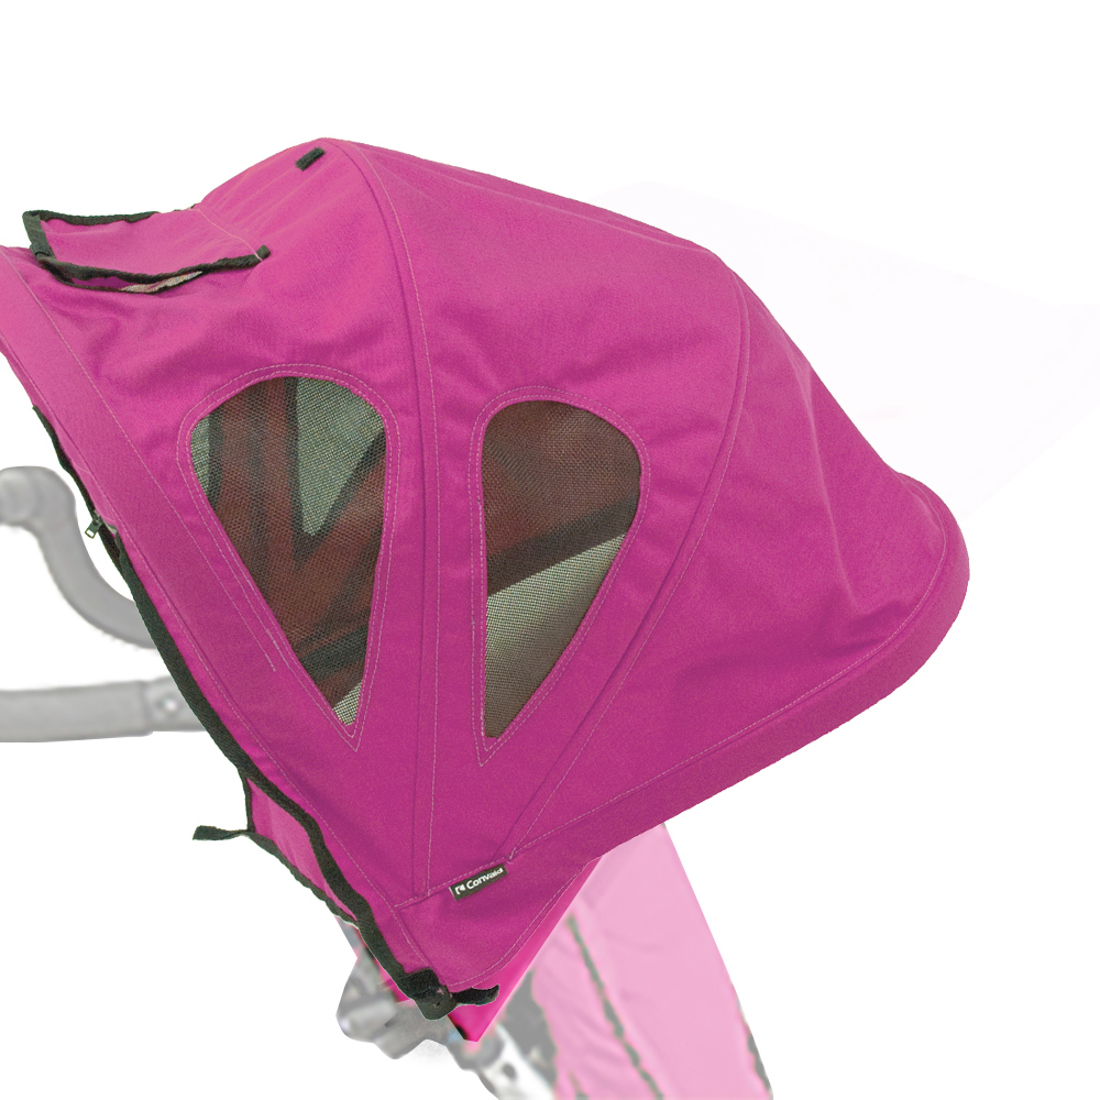 Extended Headrest Cover - with Windows (Canopy)